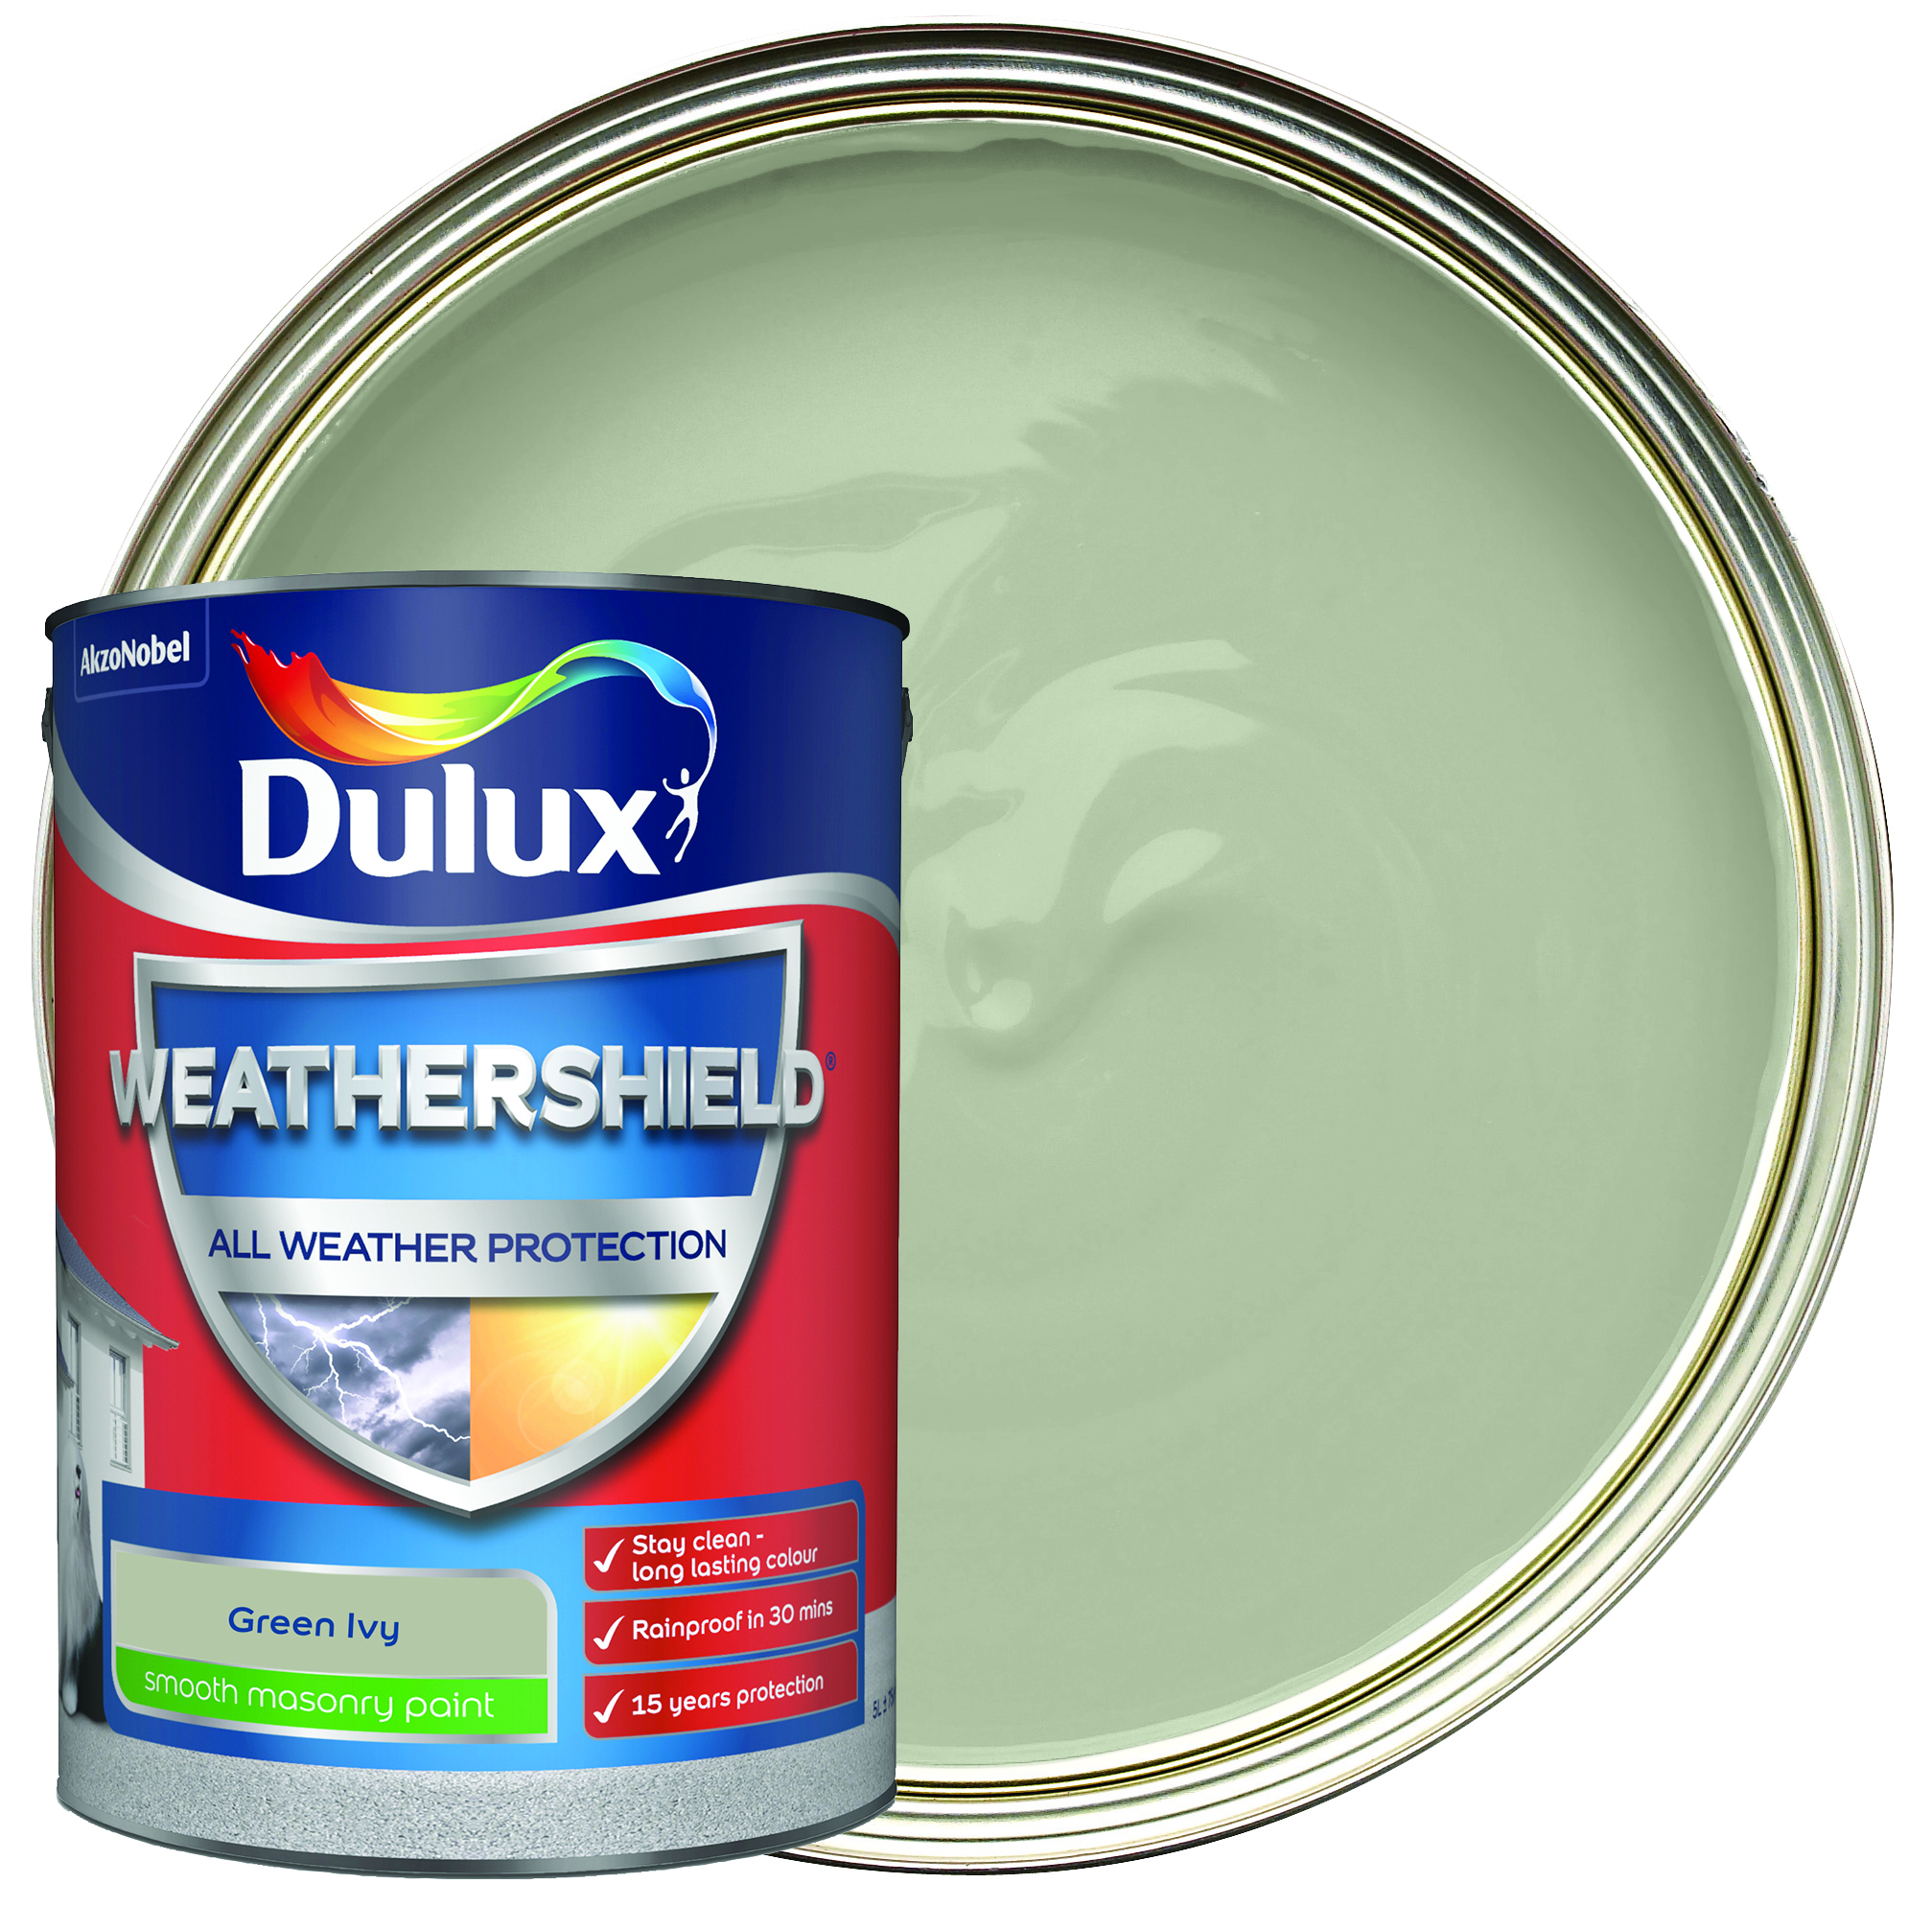 Image of Dulux Weathershield All Weather Purpose Smooth Paint - Green Ivy - 5L